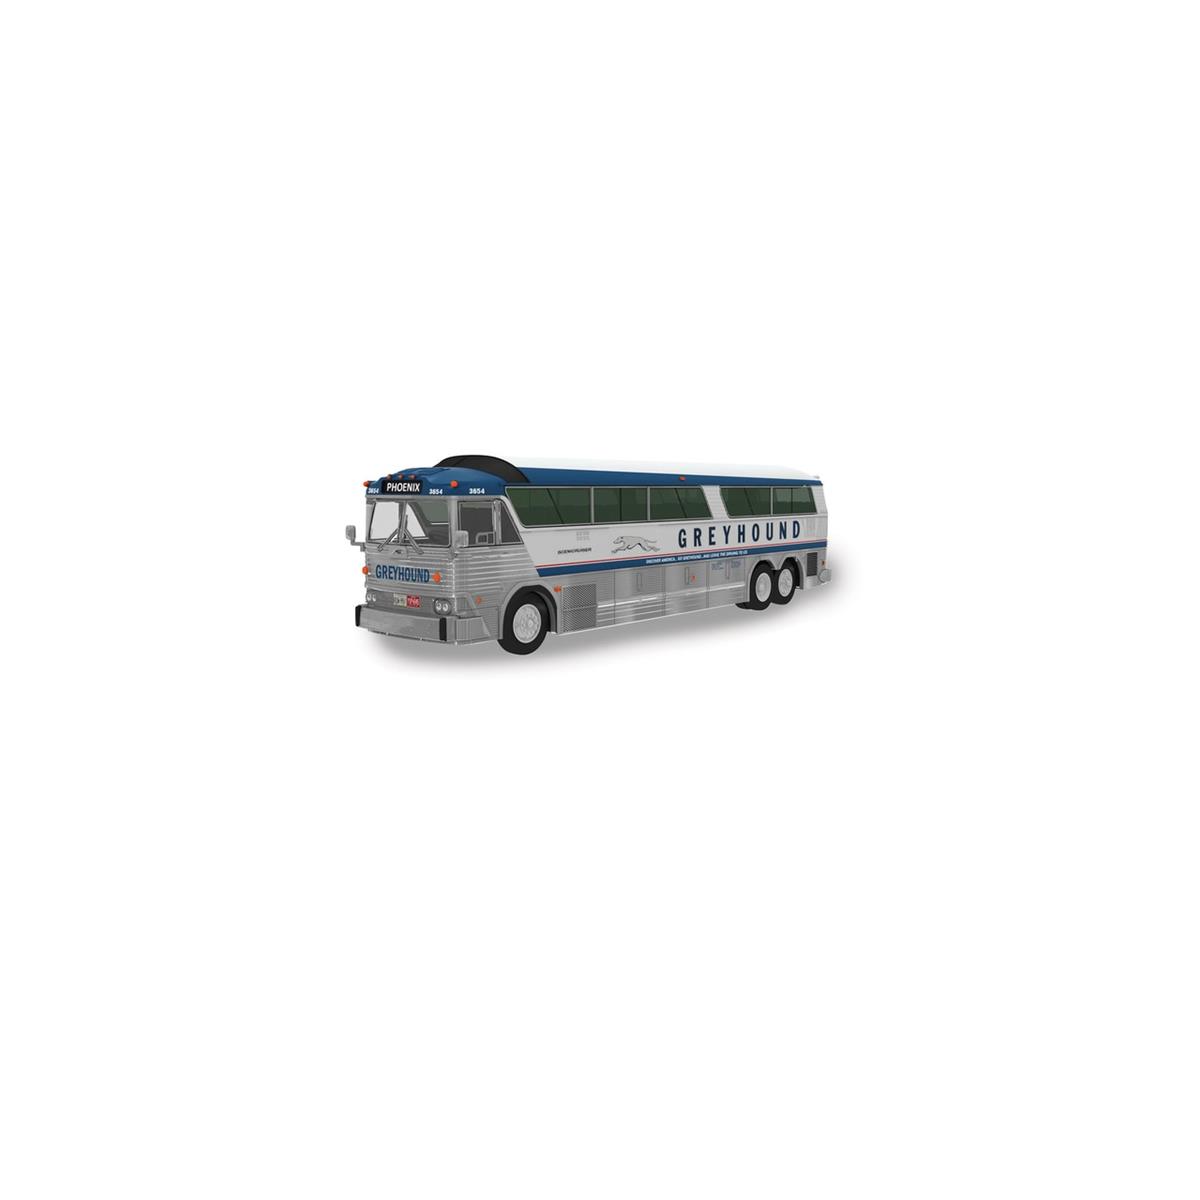 Awesome Diecast オーサム ダイキャスト Greyhound Leave the Driving to Us MC-7 Scenicruiser Bus 1/87 Scale スケール Diecast Model ダイキャスト ミニカー おもちゃ 玩具 コレクション ミニチュ ギフト プレゼント